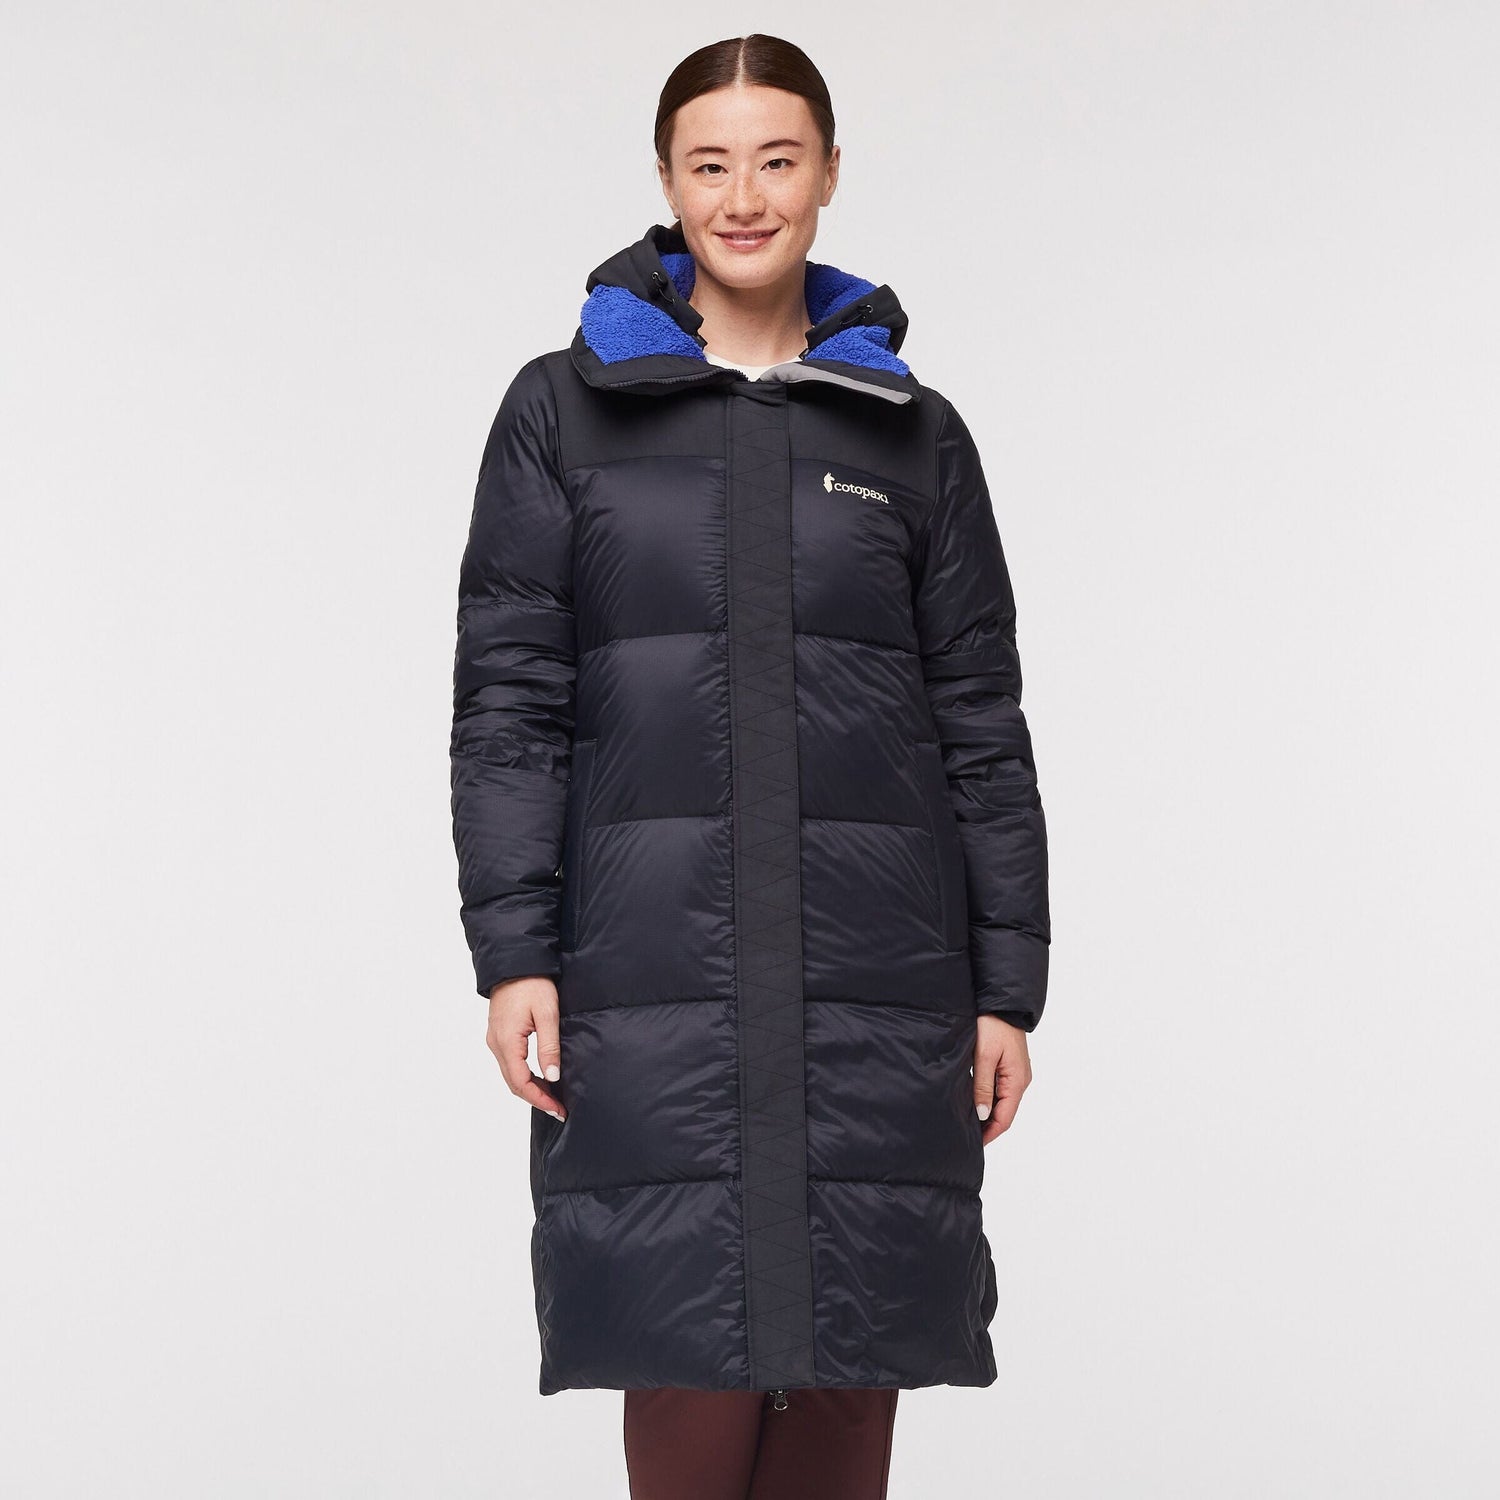 Cotopaxi - W's Solazo Down Parka - Responsibly sourced down - Weekendbee - sustainable sportswear